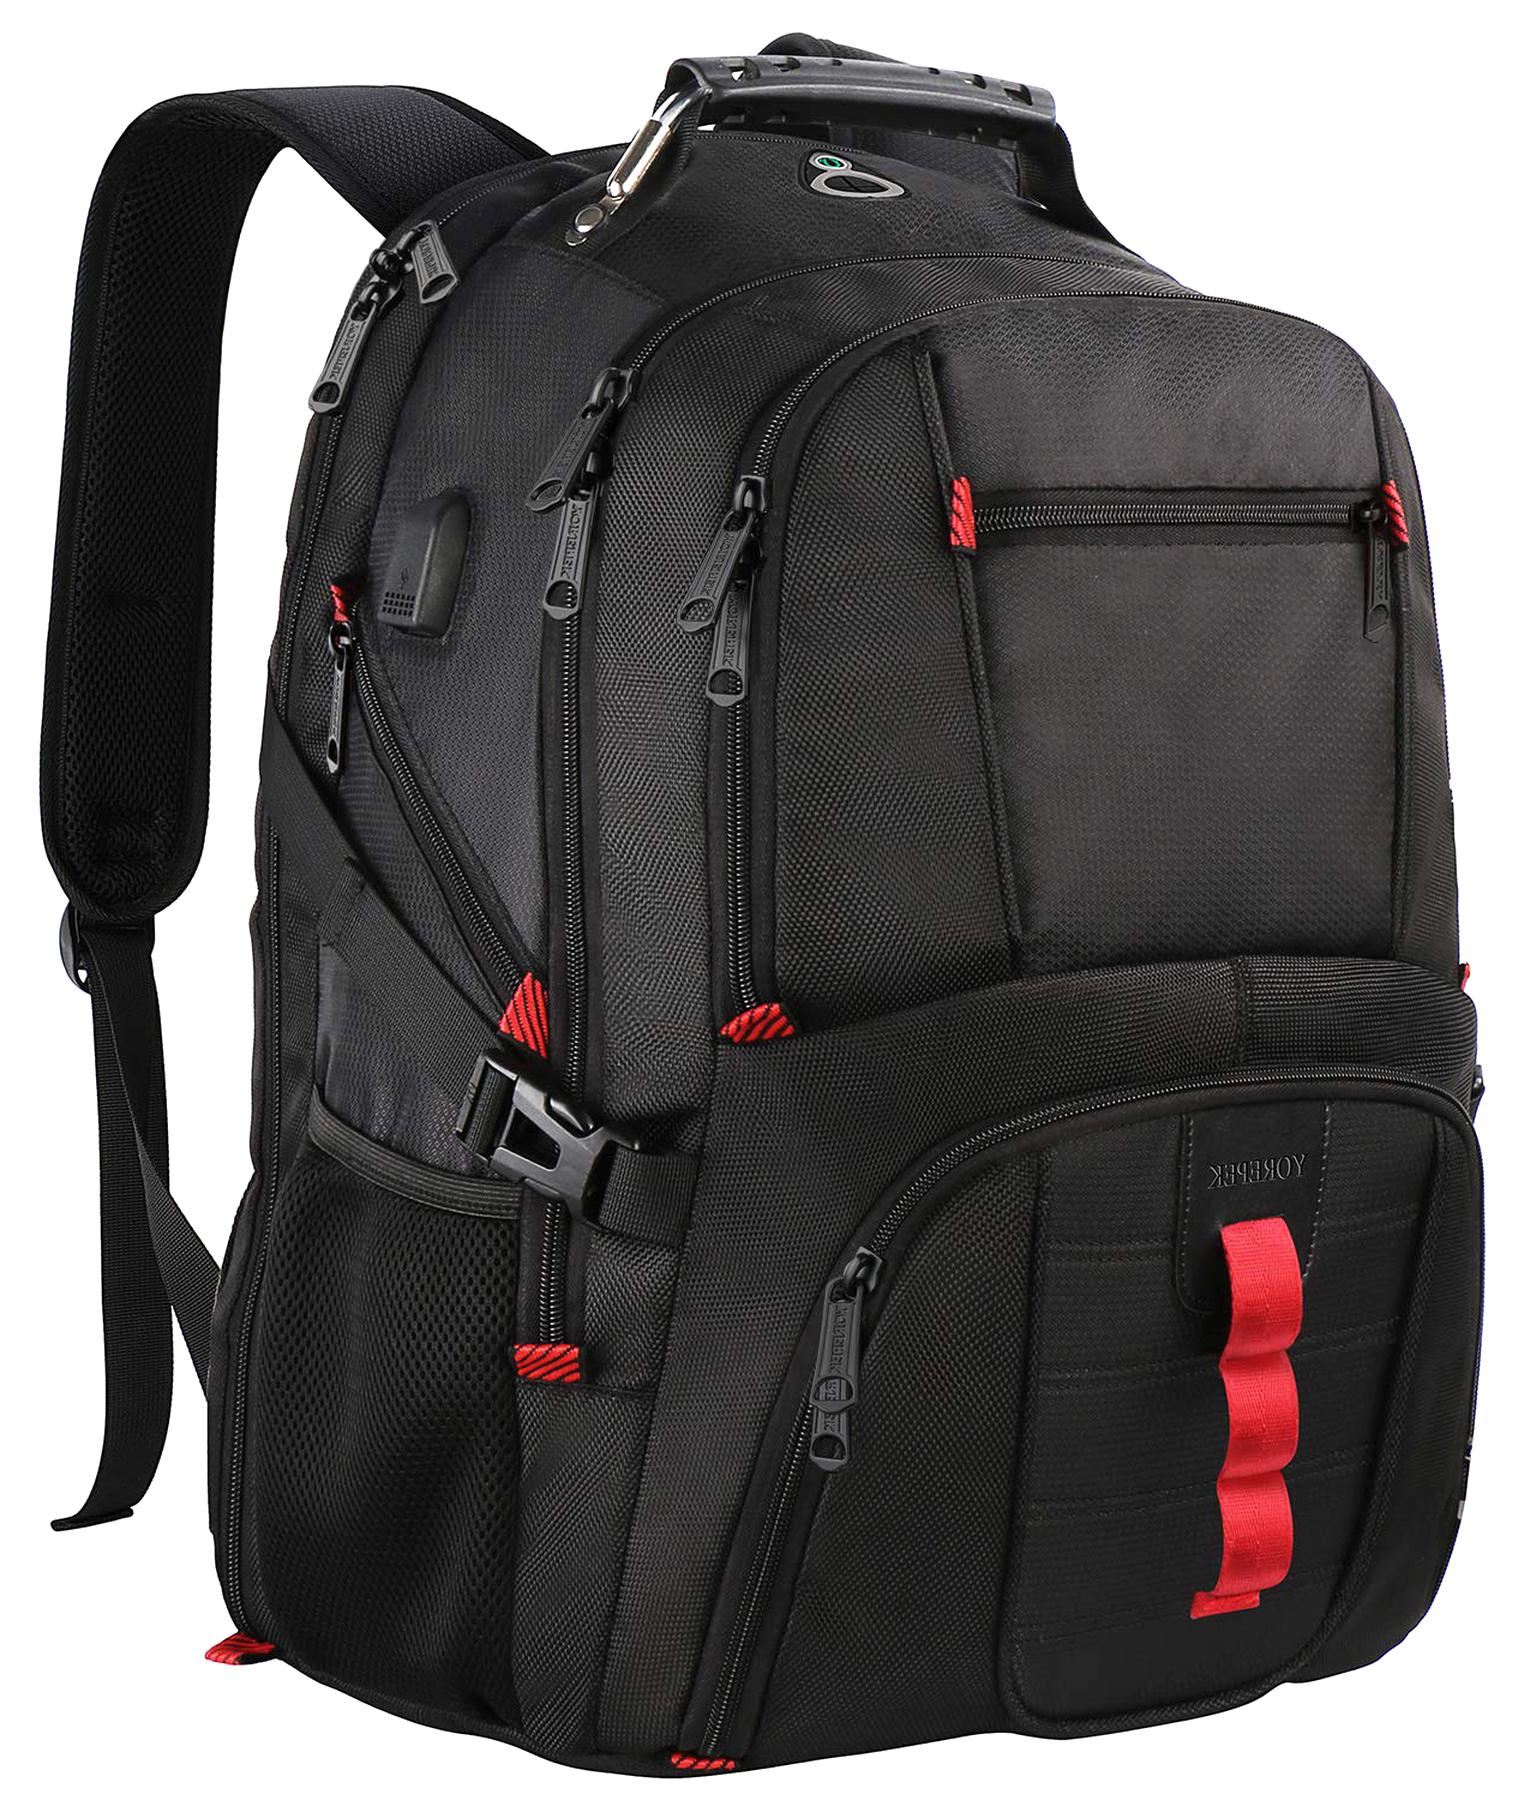 Large Backpack for sale in UK | 91 used Large Backpacks